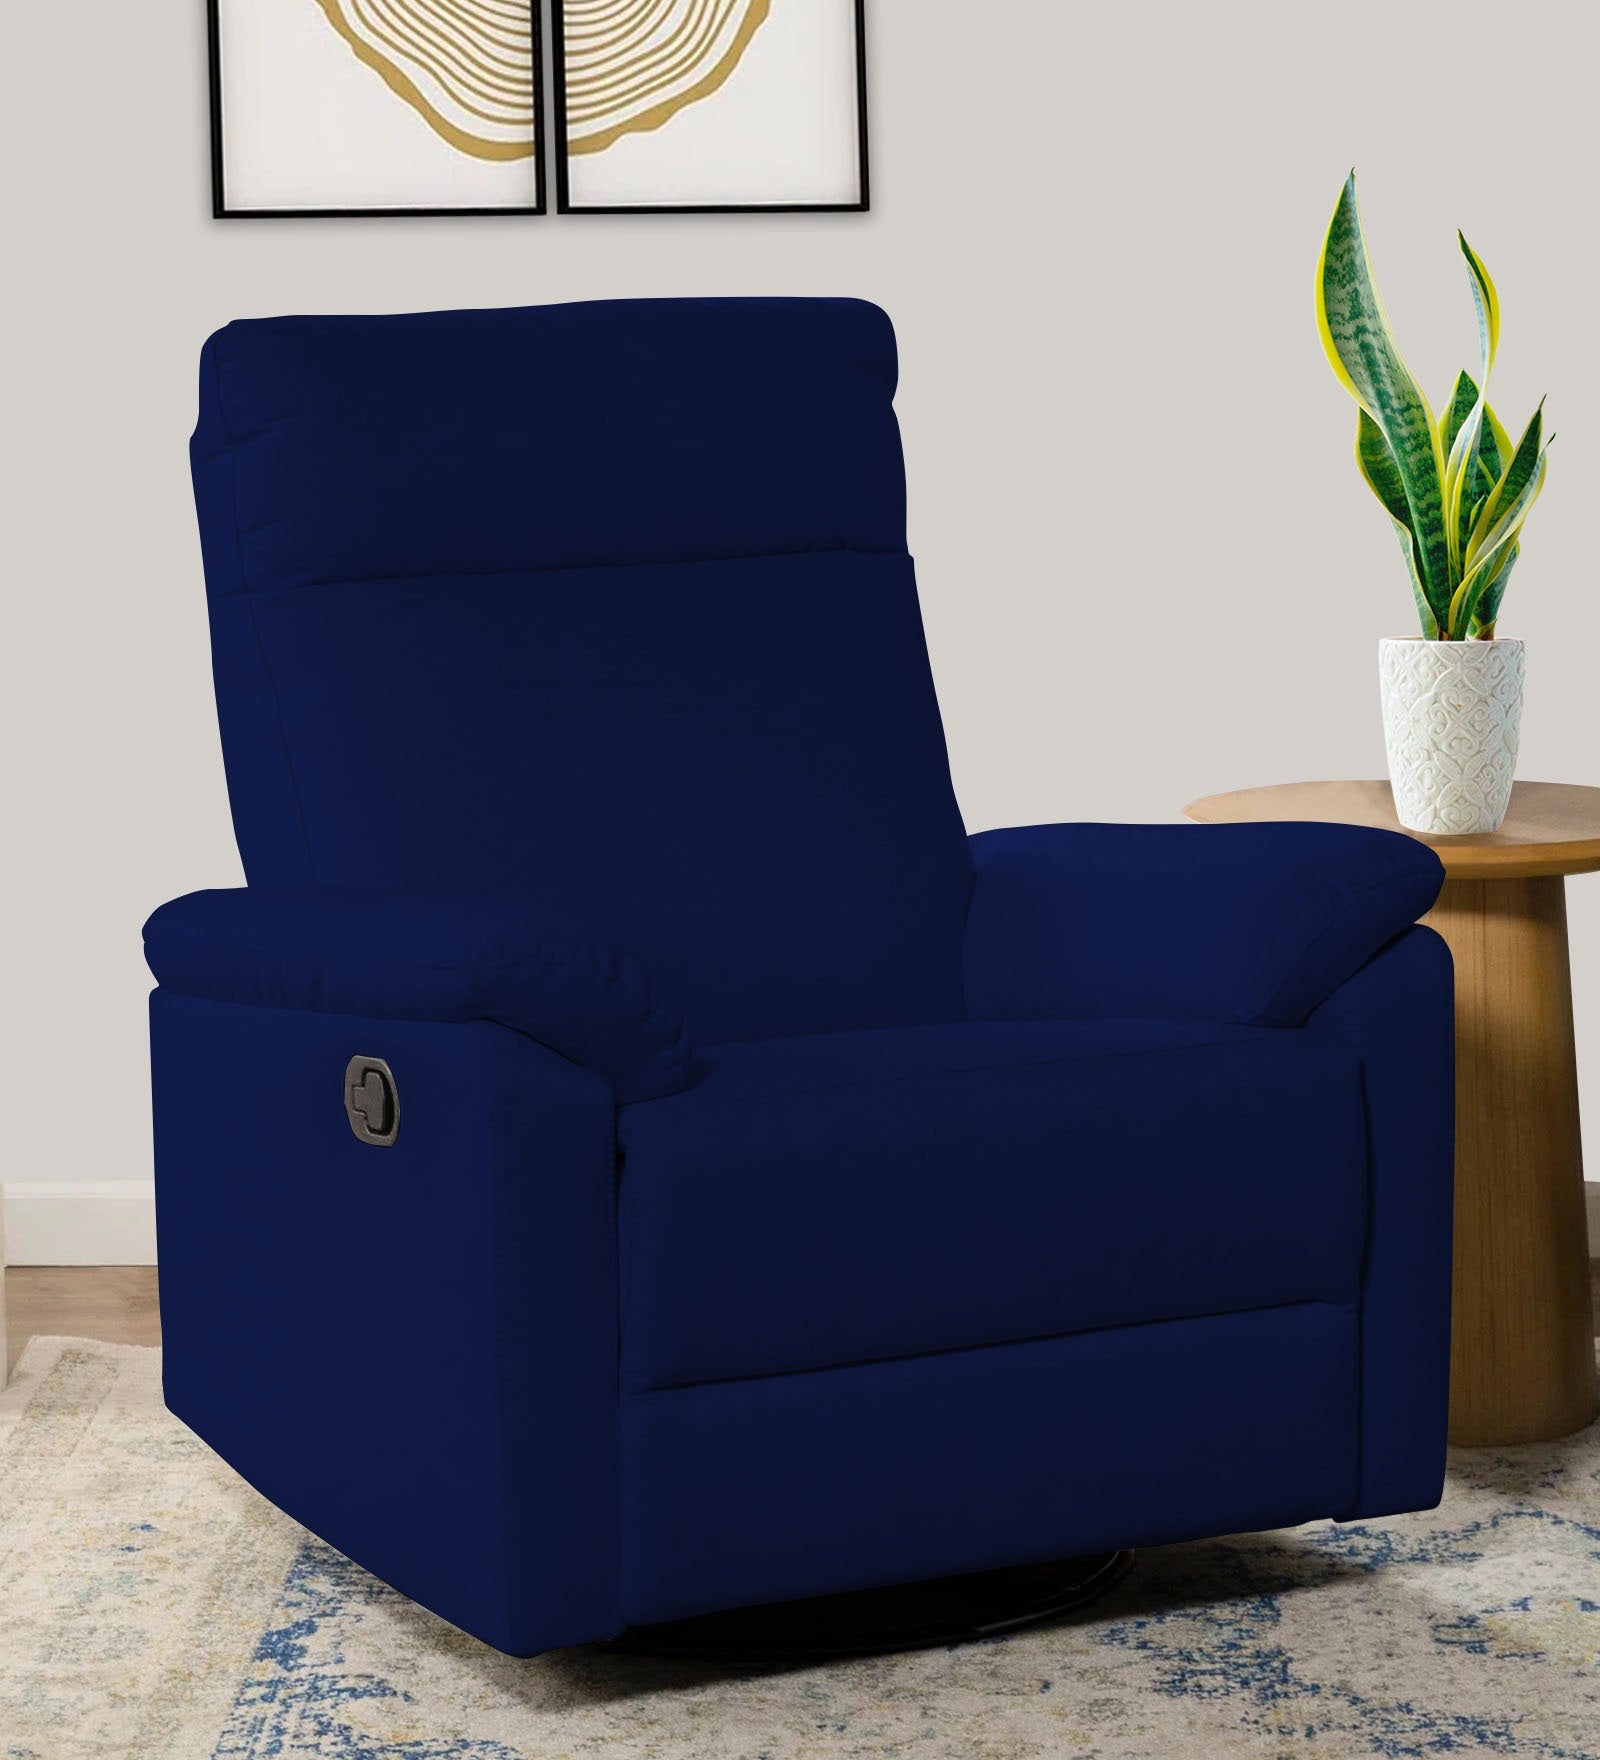 Mandy Fabric Manual 1 Seater Recliner In Royal Blue Colour